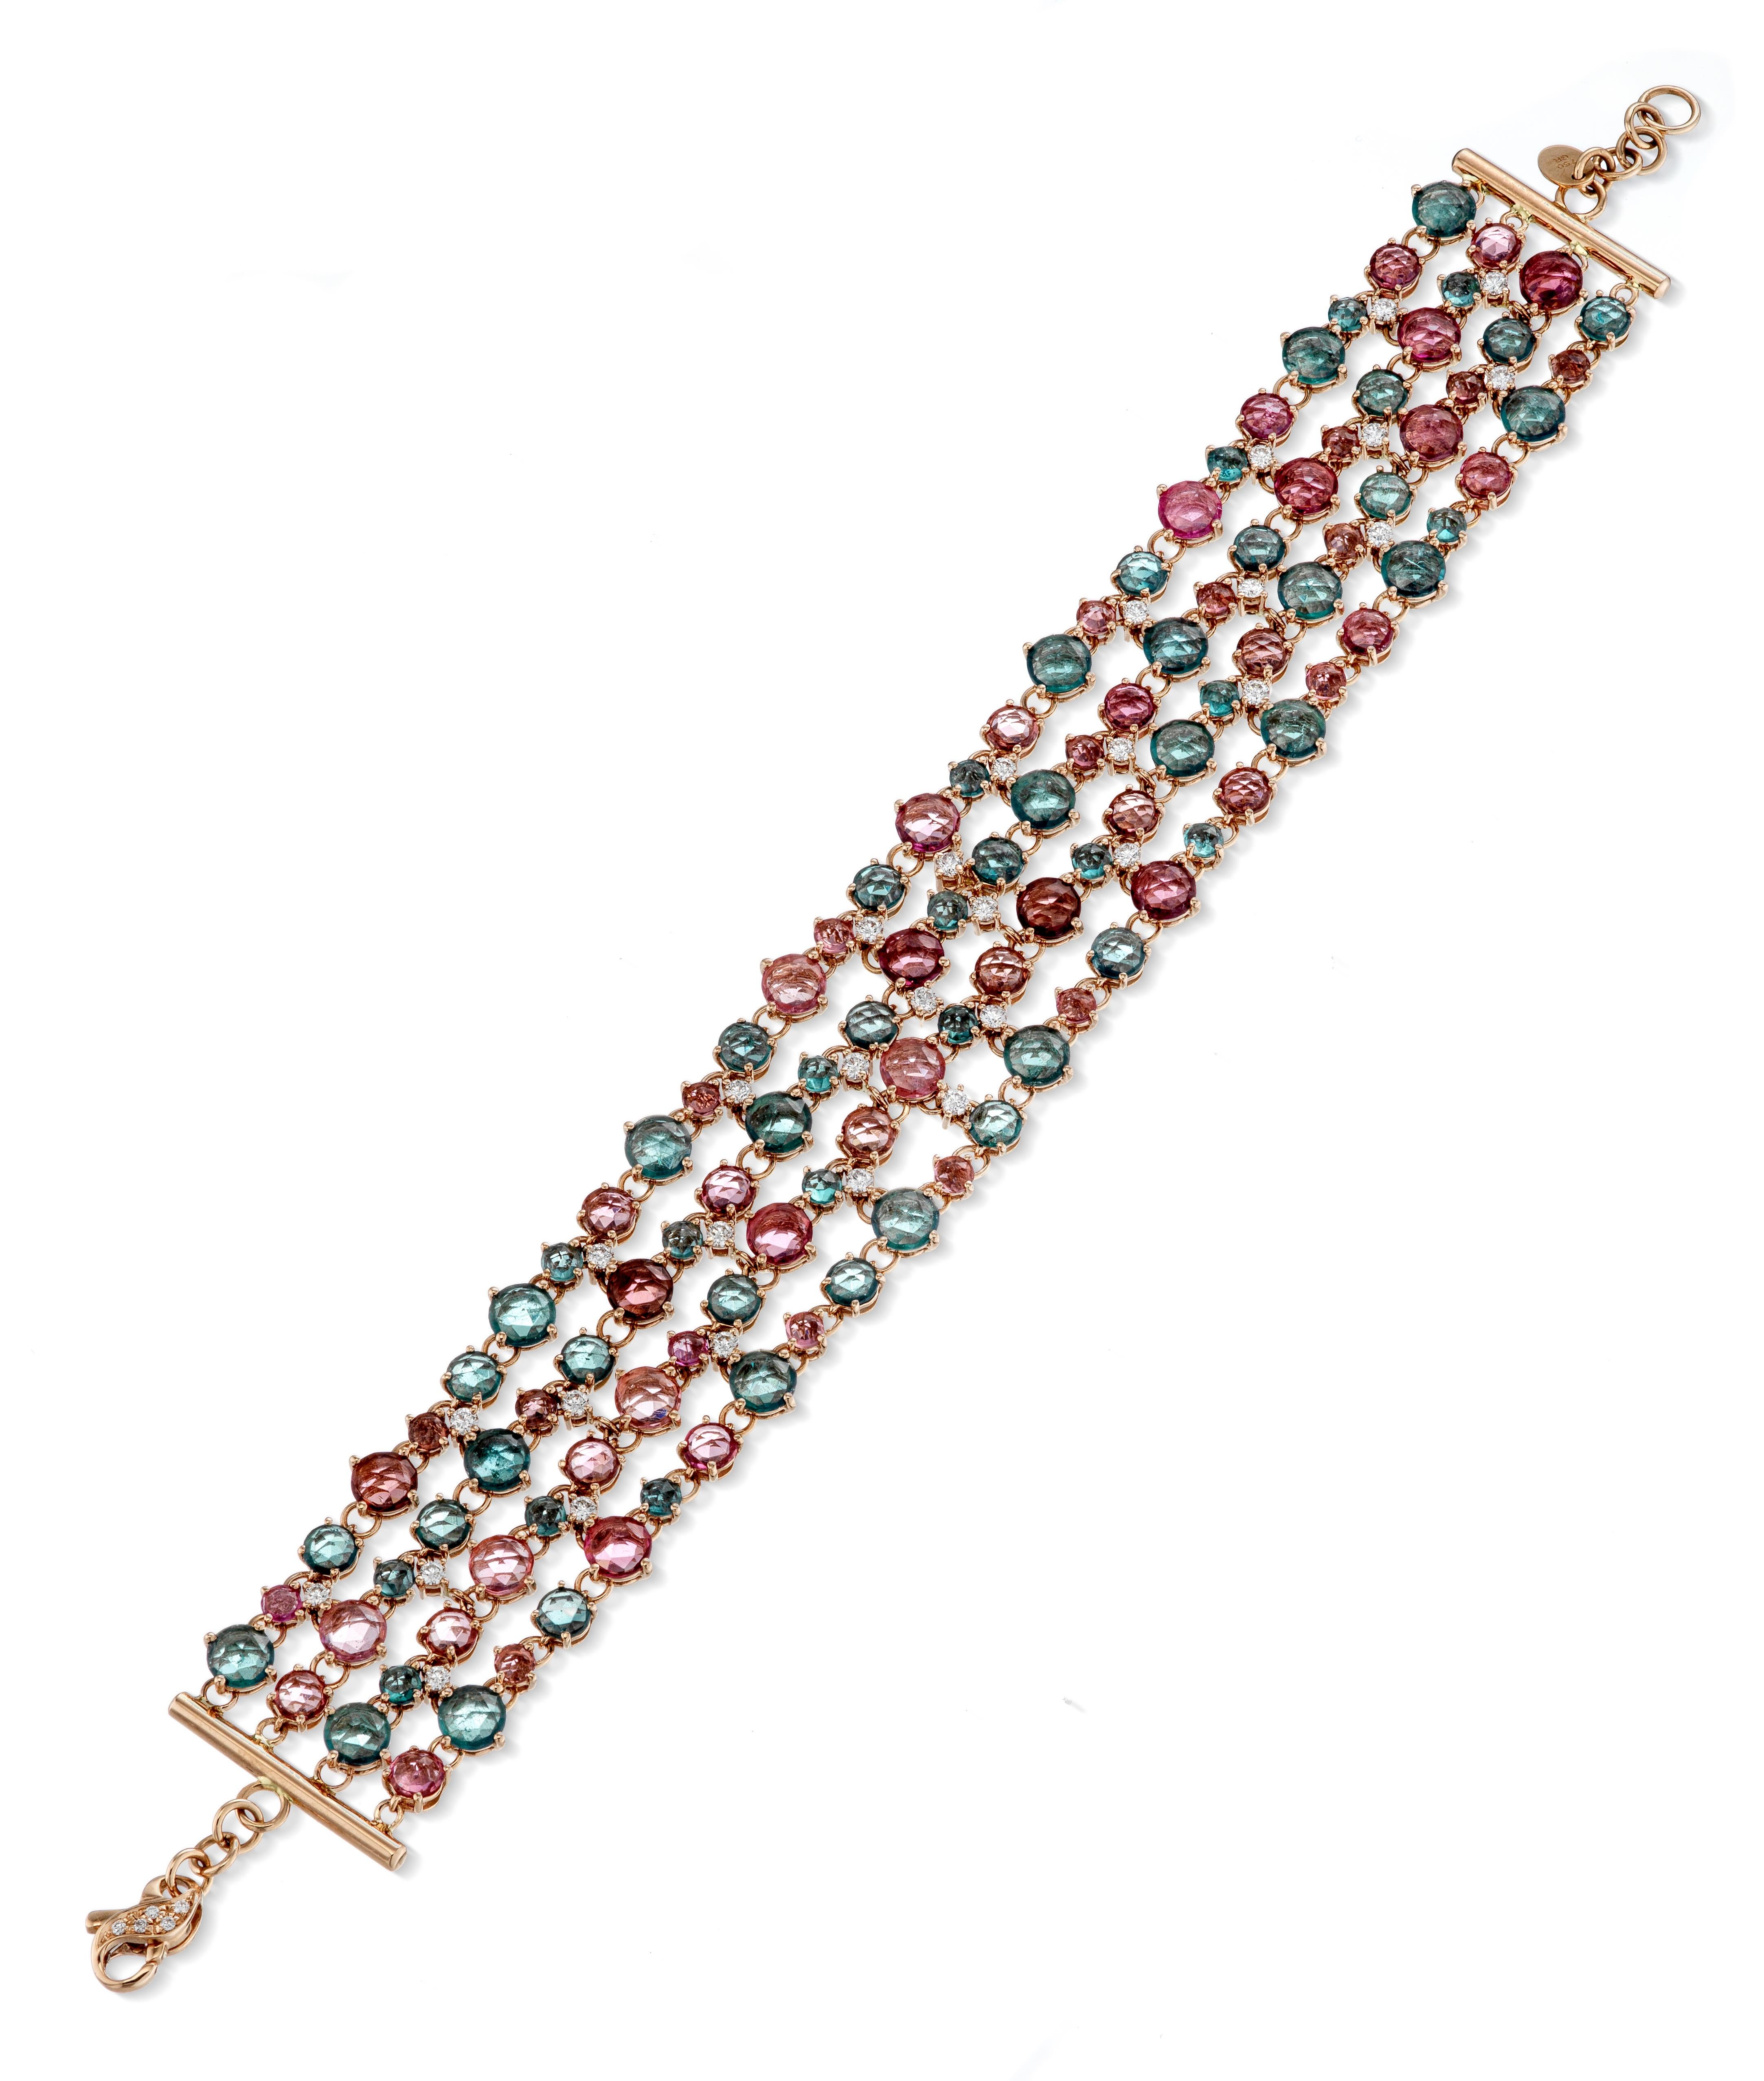 Bracelet White 18K Gold (Bracelet in Rose 18K Gold With Tourmaline Also Available)

Diamond 0,99 ct
Blue Sapphire
White Sapphire
London Blue Topaz

Length 20 cm
Weight 38.6

It is our honour to create fine jewelry, and it’s for that reason that we